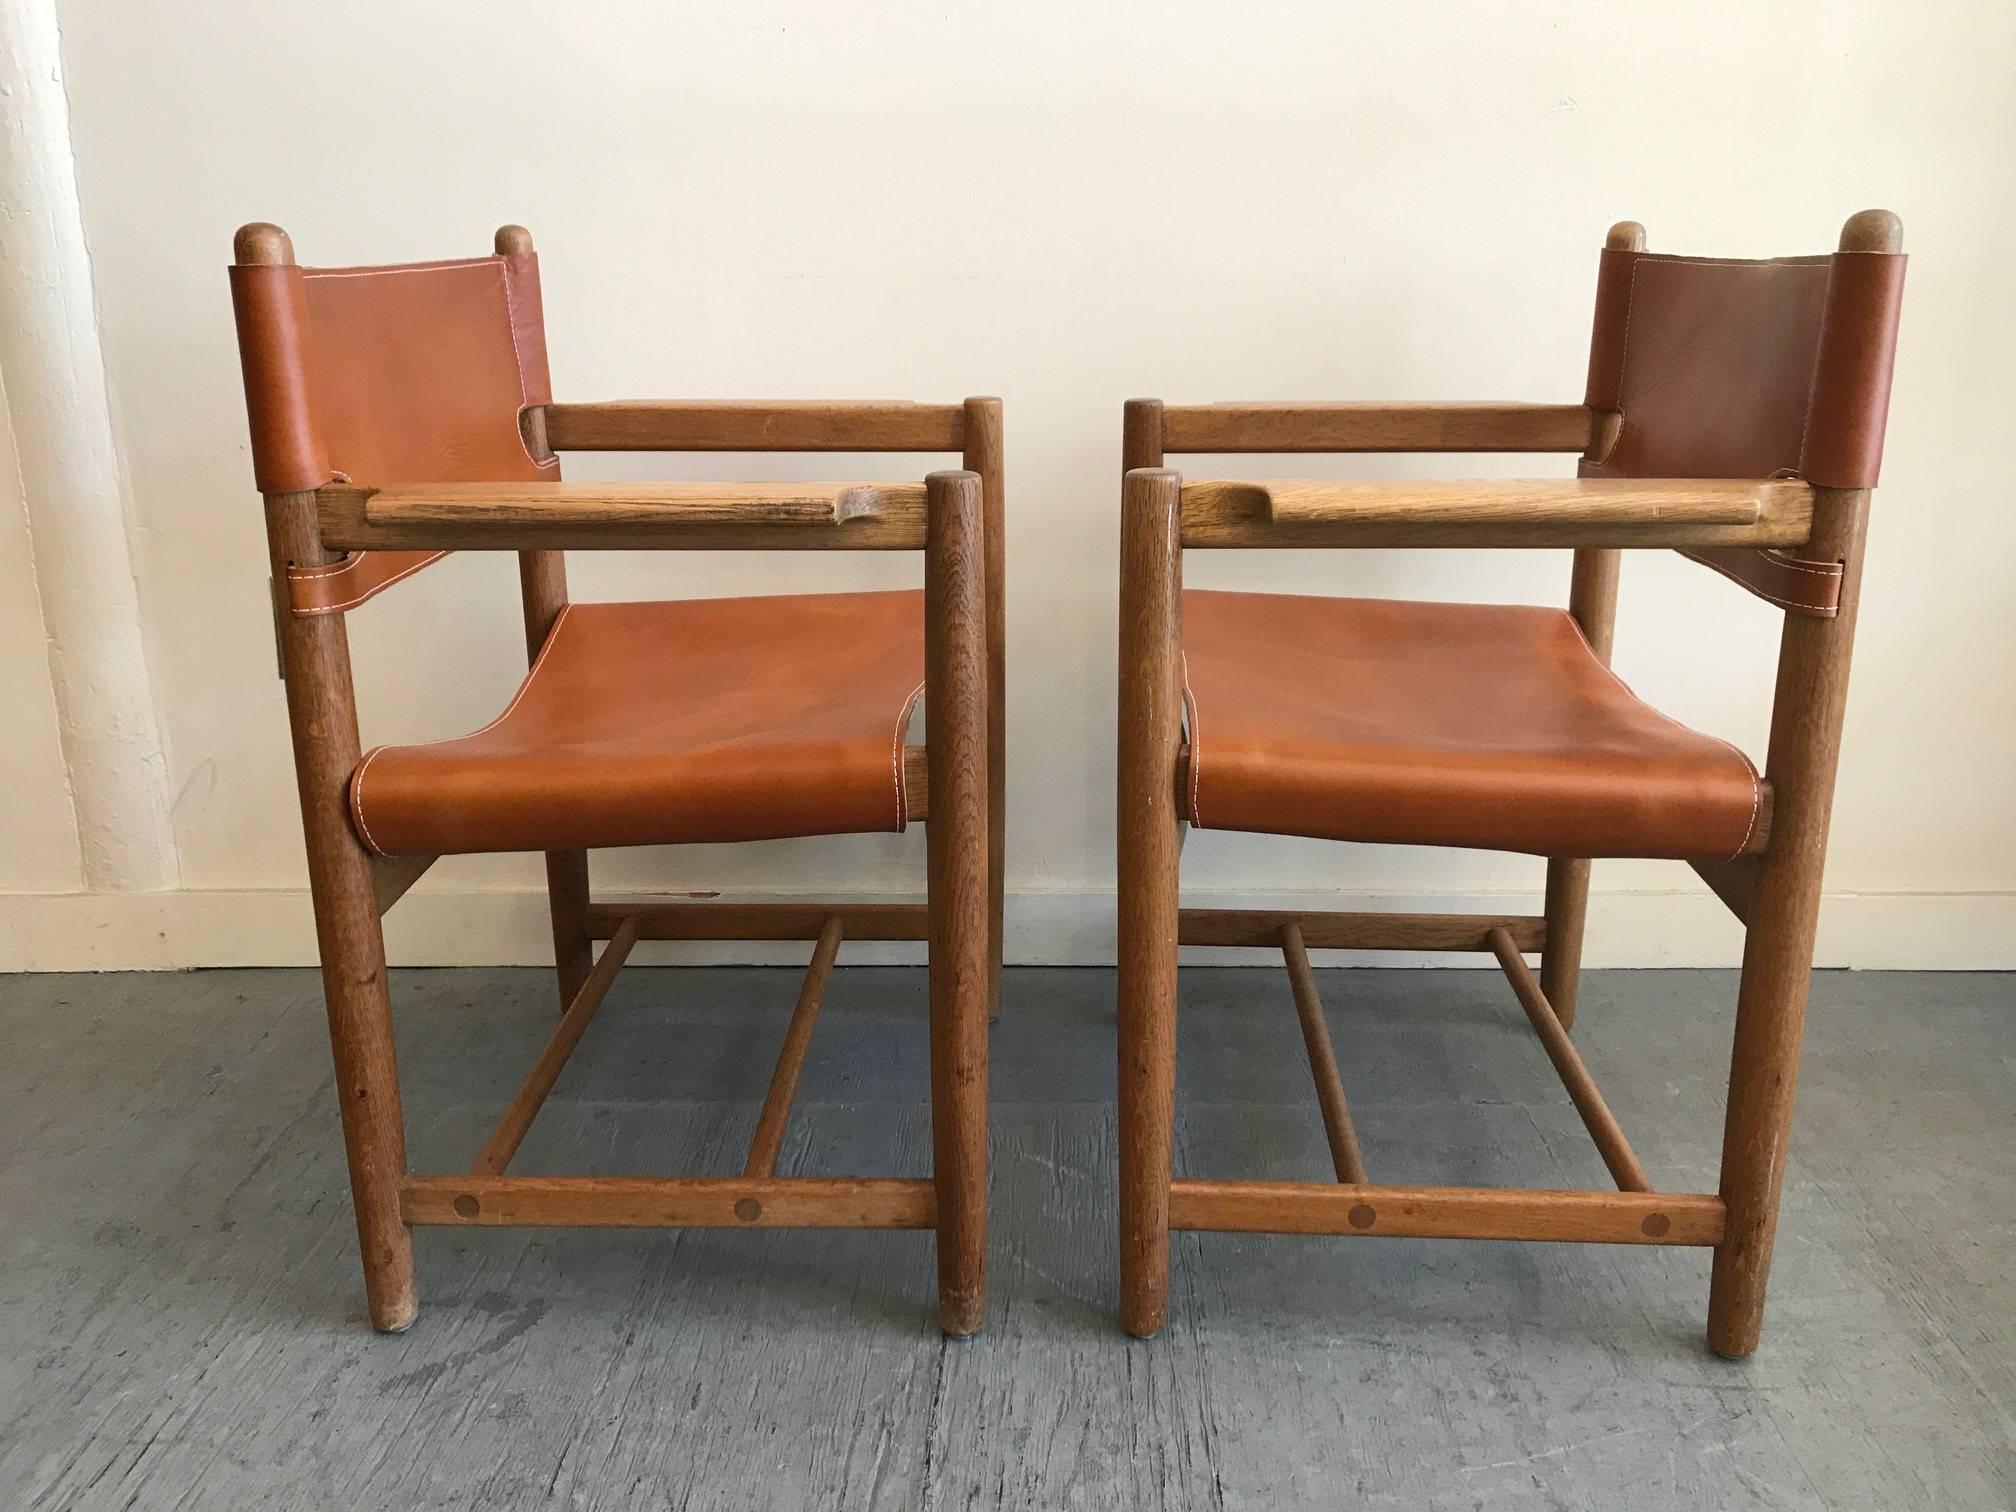 Beautiful safari chairs designed by Børge Mogensen, circa 1960s, Denmark. Seats are fully adjustable. New leather hides.